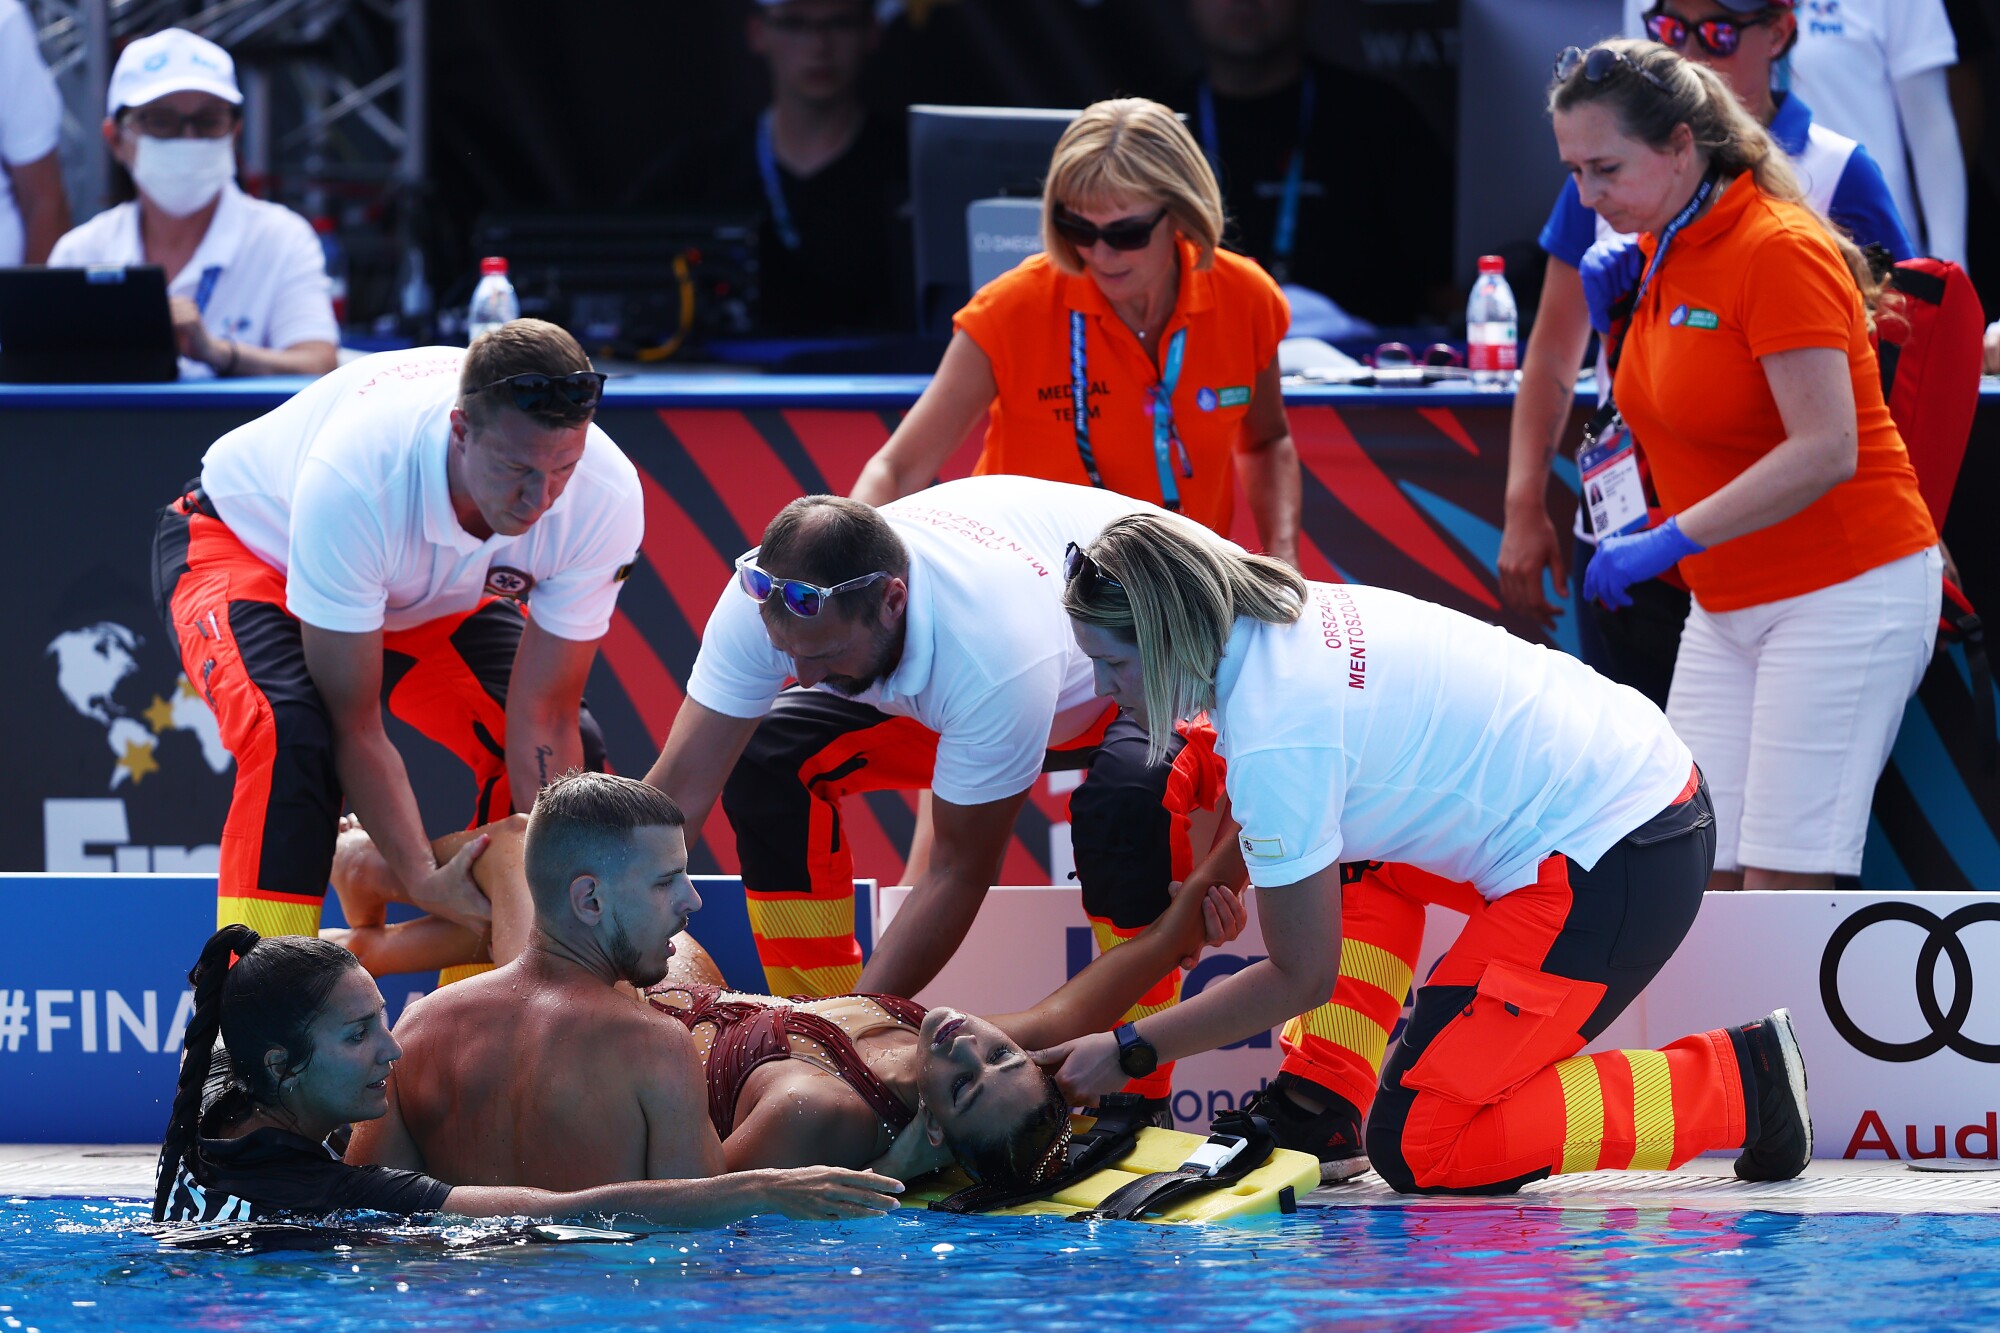 Anita Alvarez, from the USA team, is attended to by the medical team after her performance in the women's free solo final 